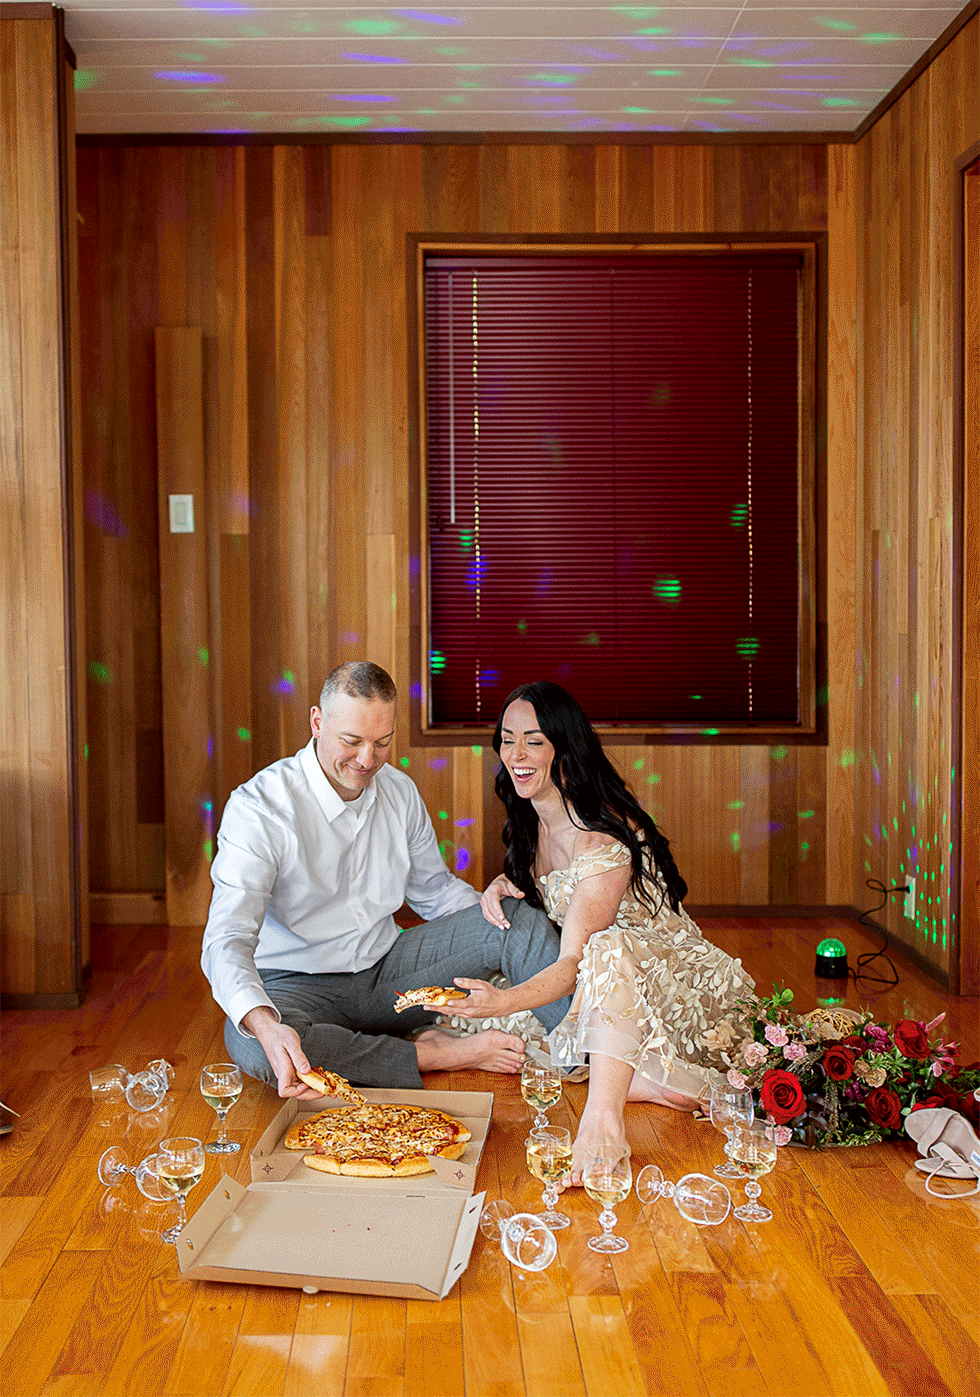 indoor-airbnb-pizza-enagement-session-vow-renewal